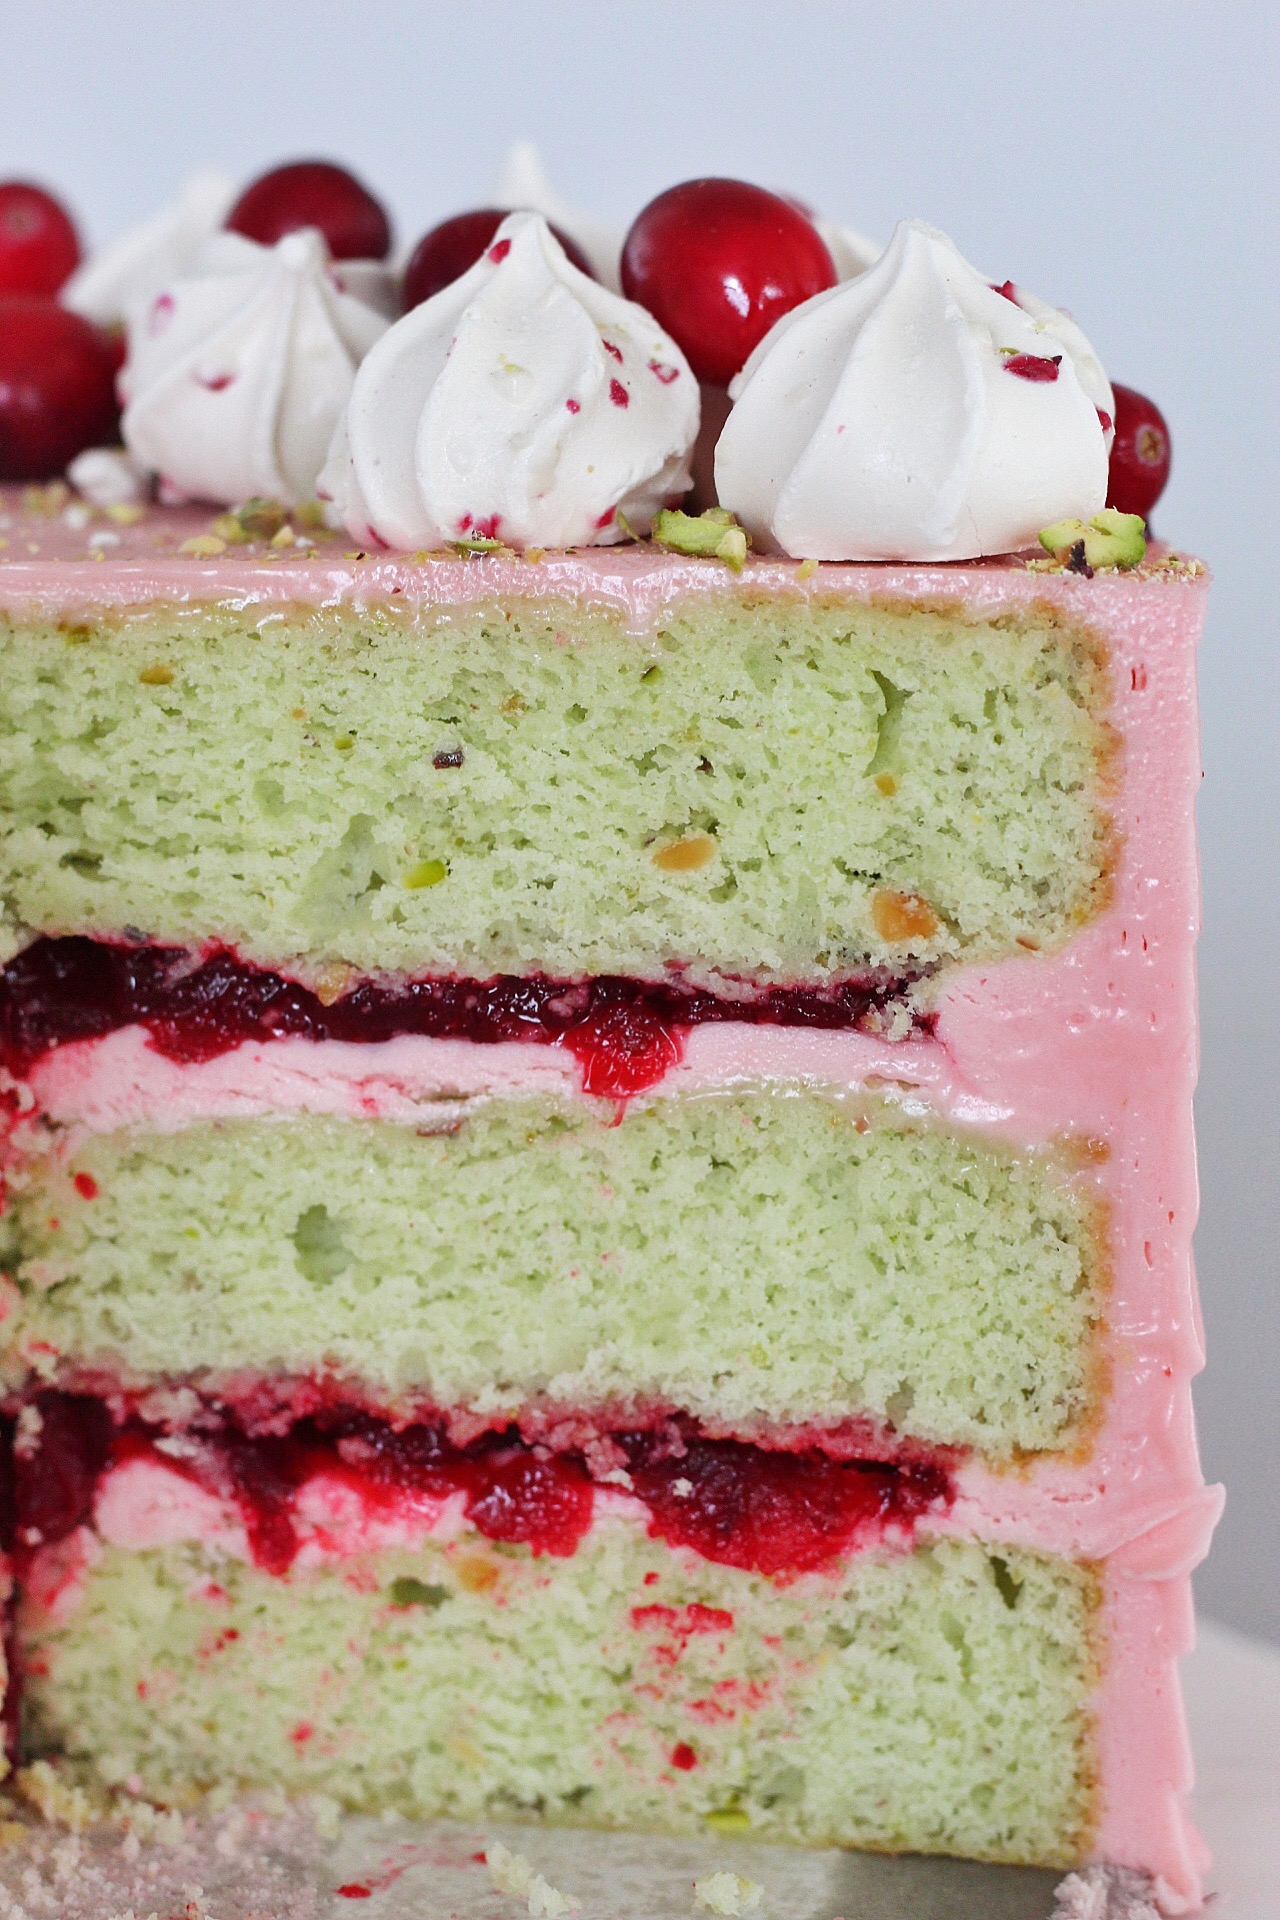 Inside view of a pistachio cake with cranberry compote.